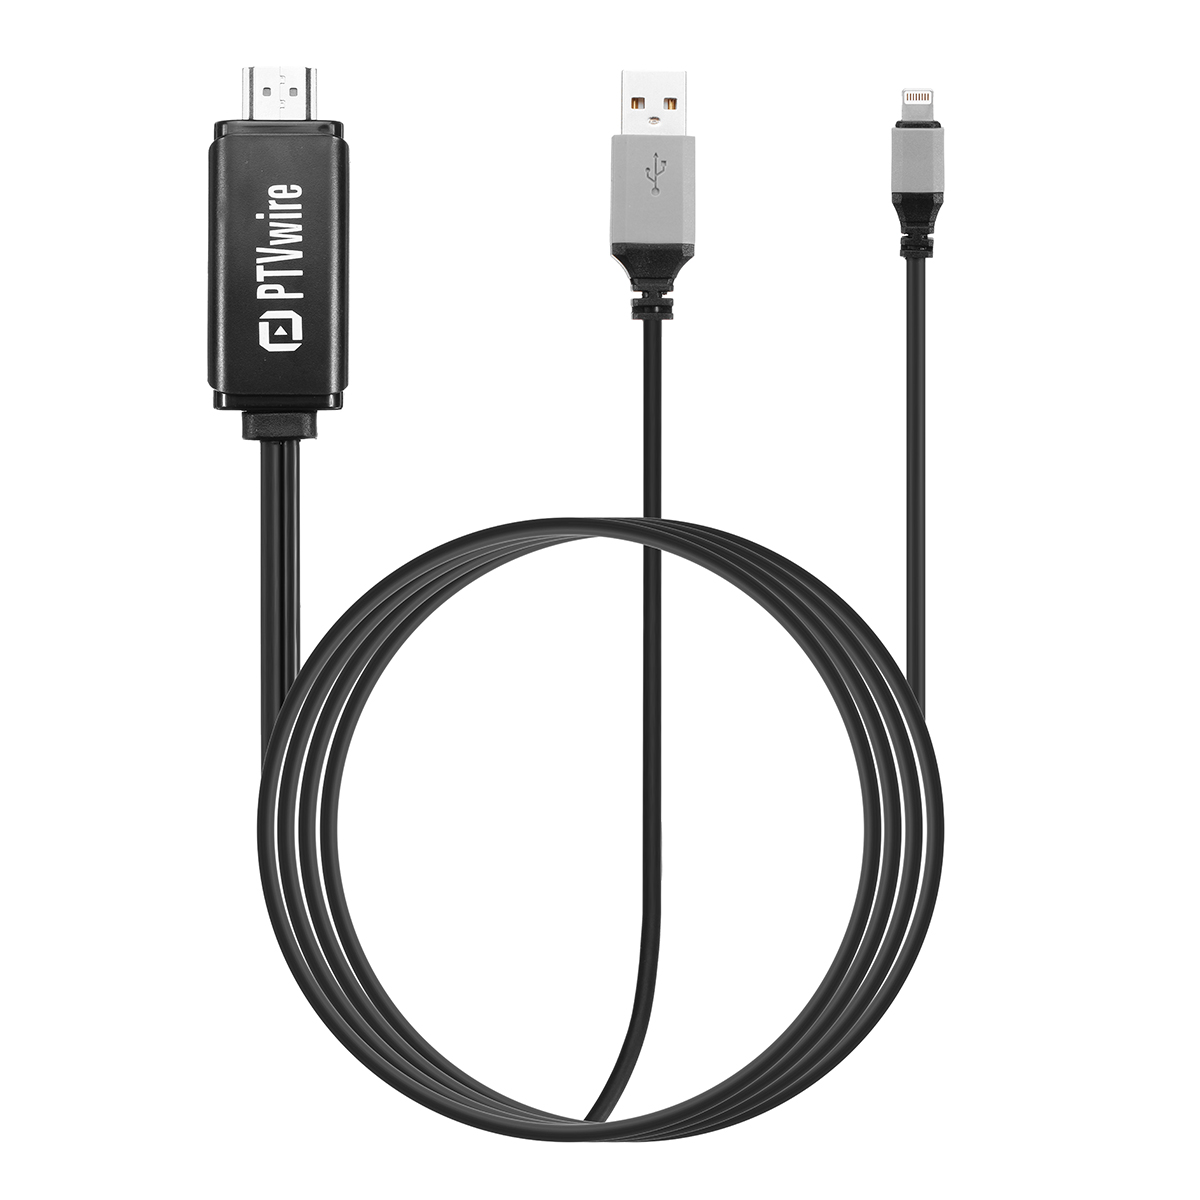 Bakeey USB to HDMI Adapter Cable Support 8 Channels Digital Audio Support Airplay/Mirroring 2M Long